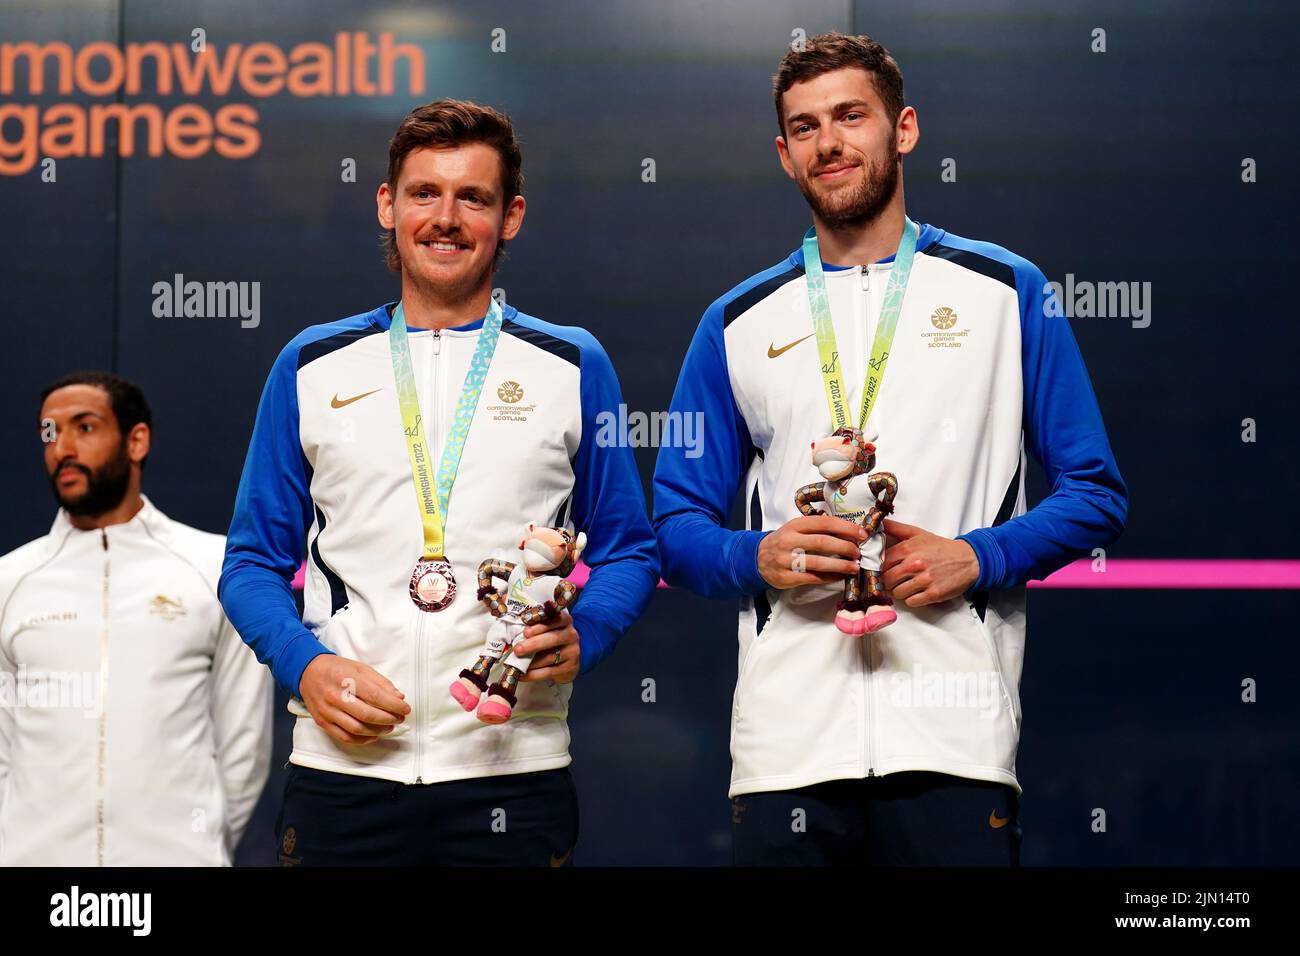 Scotland's Greg Lobban and Rory Stewart with the bronze medals after the Men's Squash Double Bronze medal match at the University of Birmingham Hockey and Squash Centre on day eleven of the 2022 Commonwealth Games in Birmingham. Picture date: Monday August 8, 2022. Stock Photo